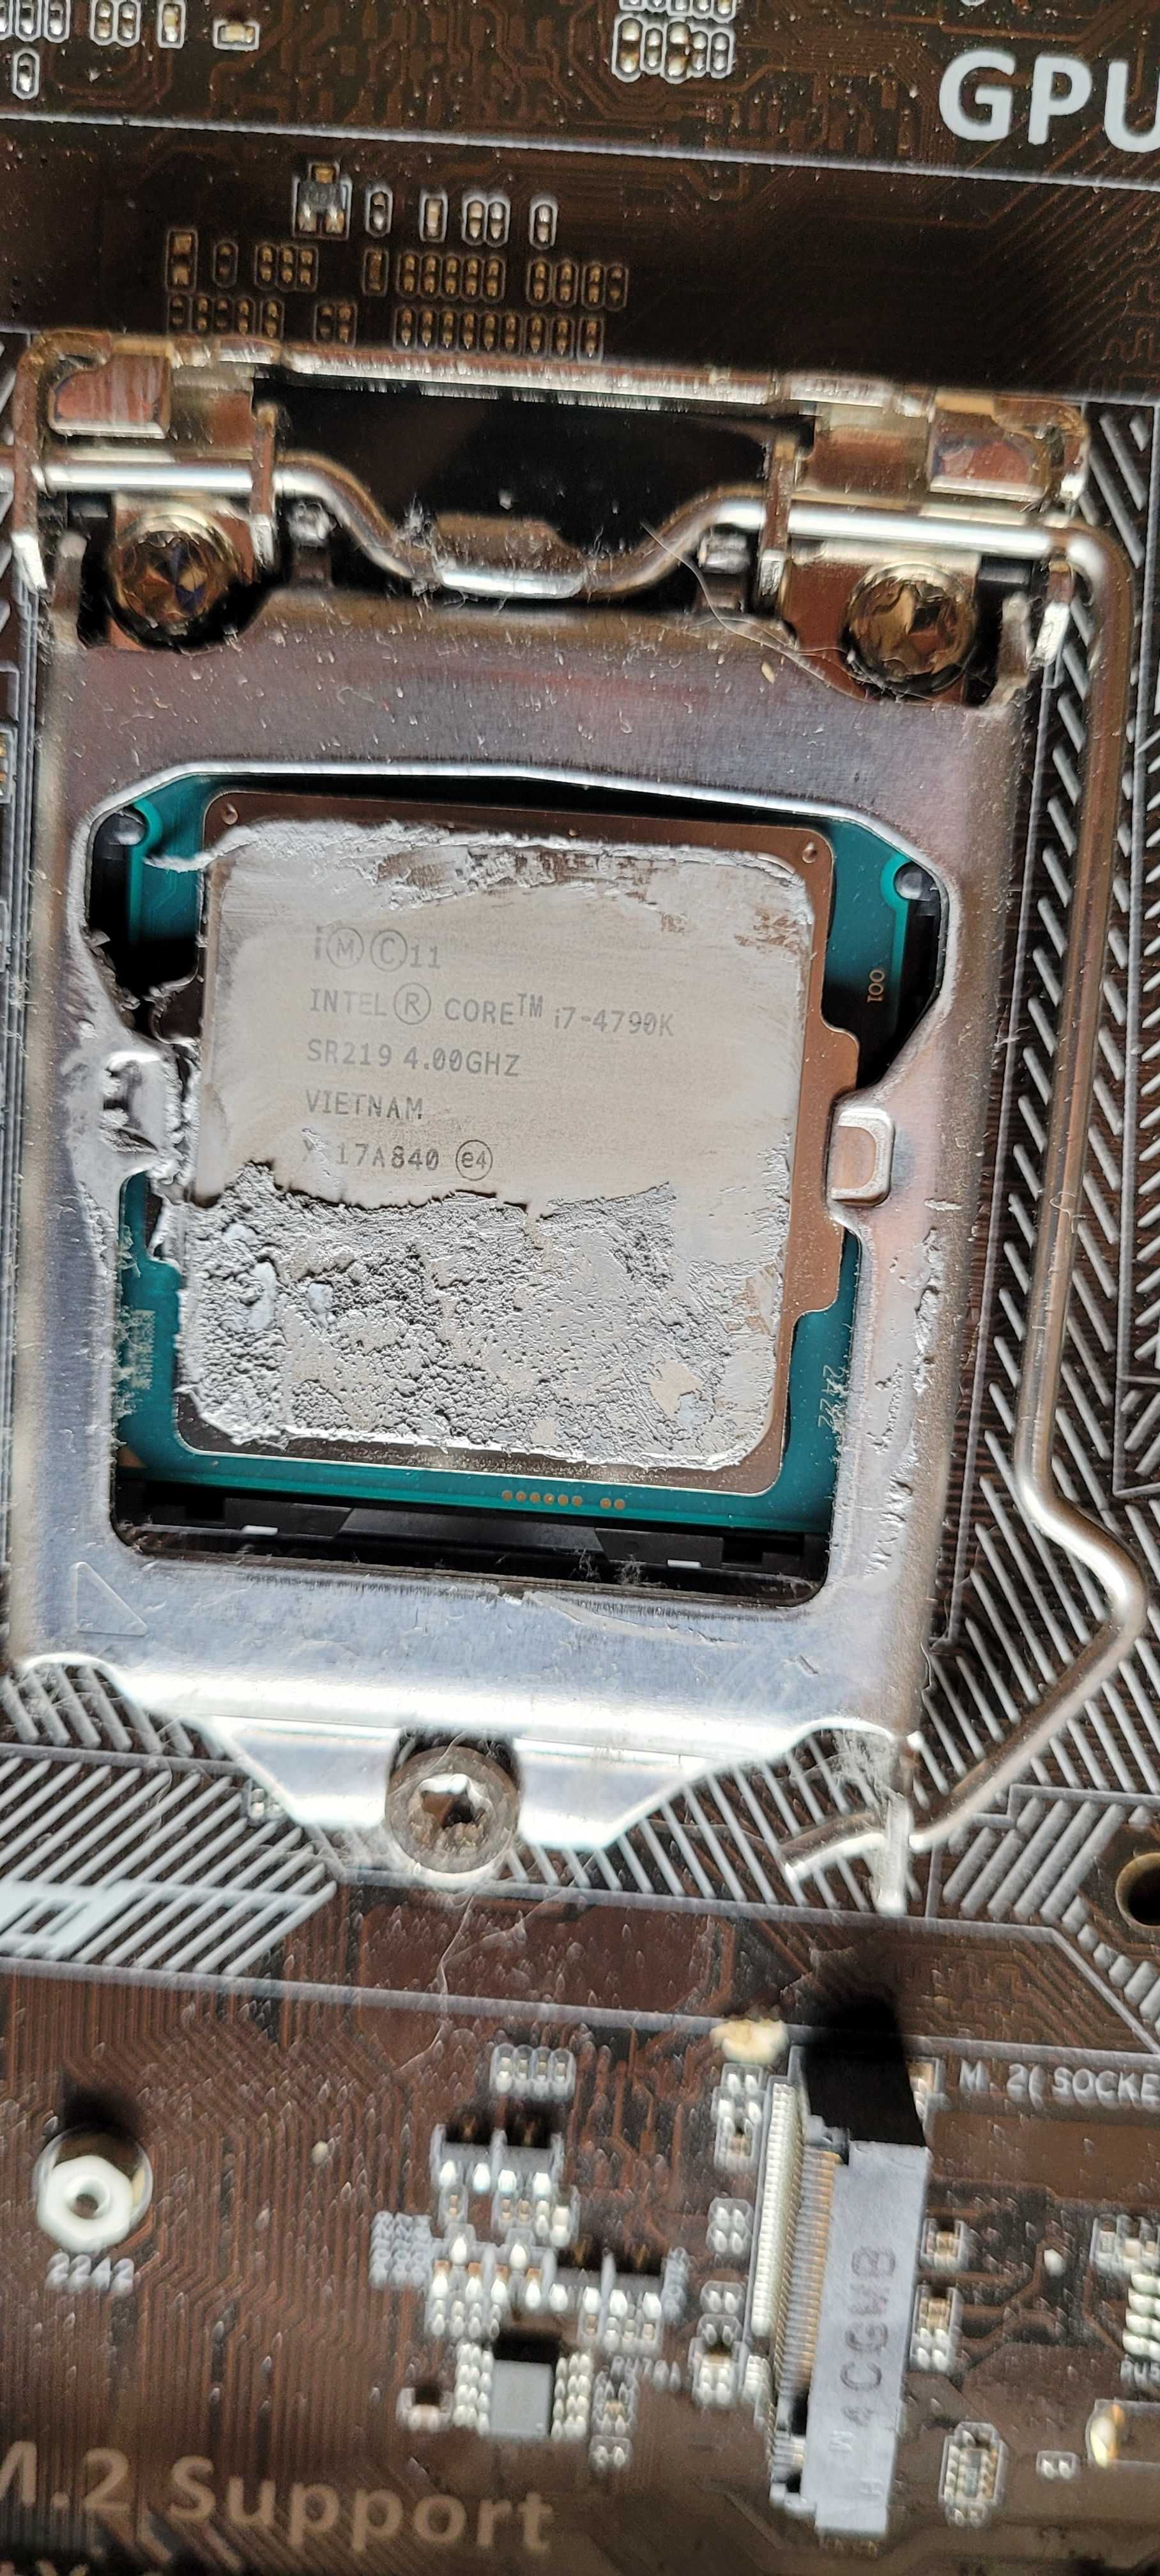 Procesor Intel Haswell, i7 4790K 4.0GHz socket 1150 si asus z97-p